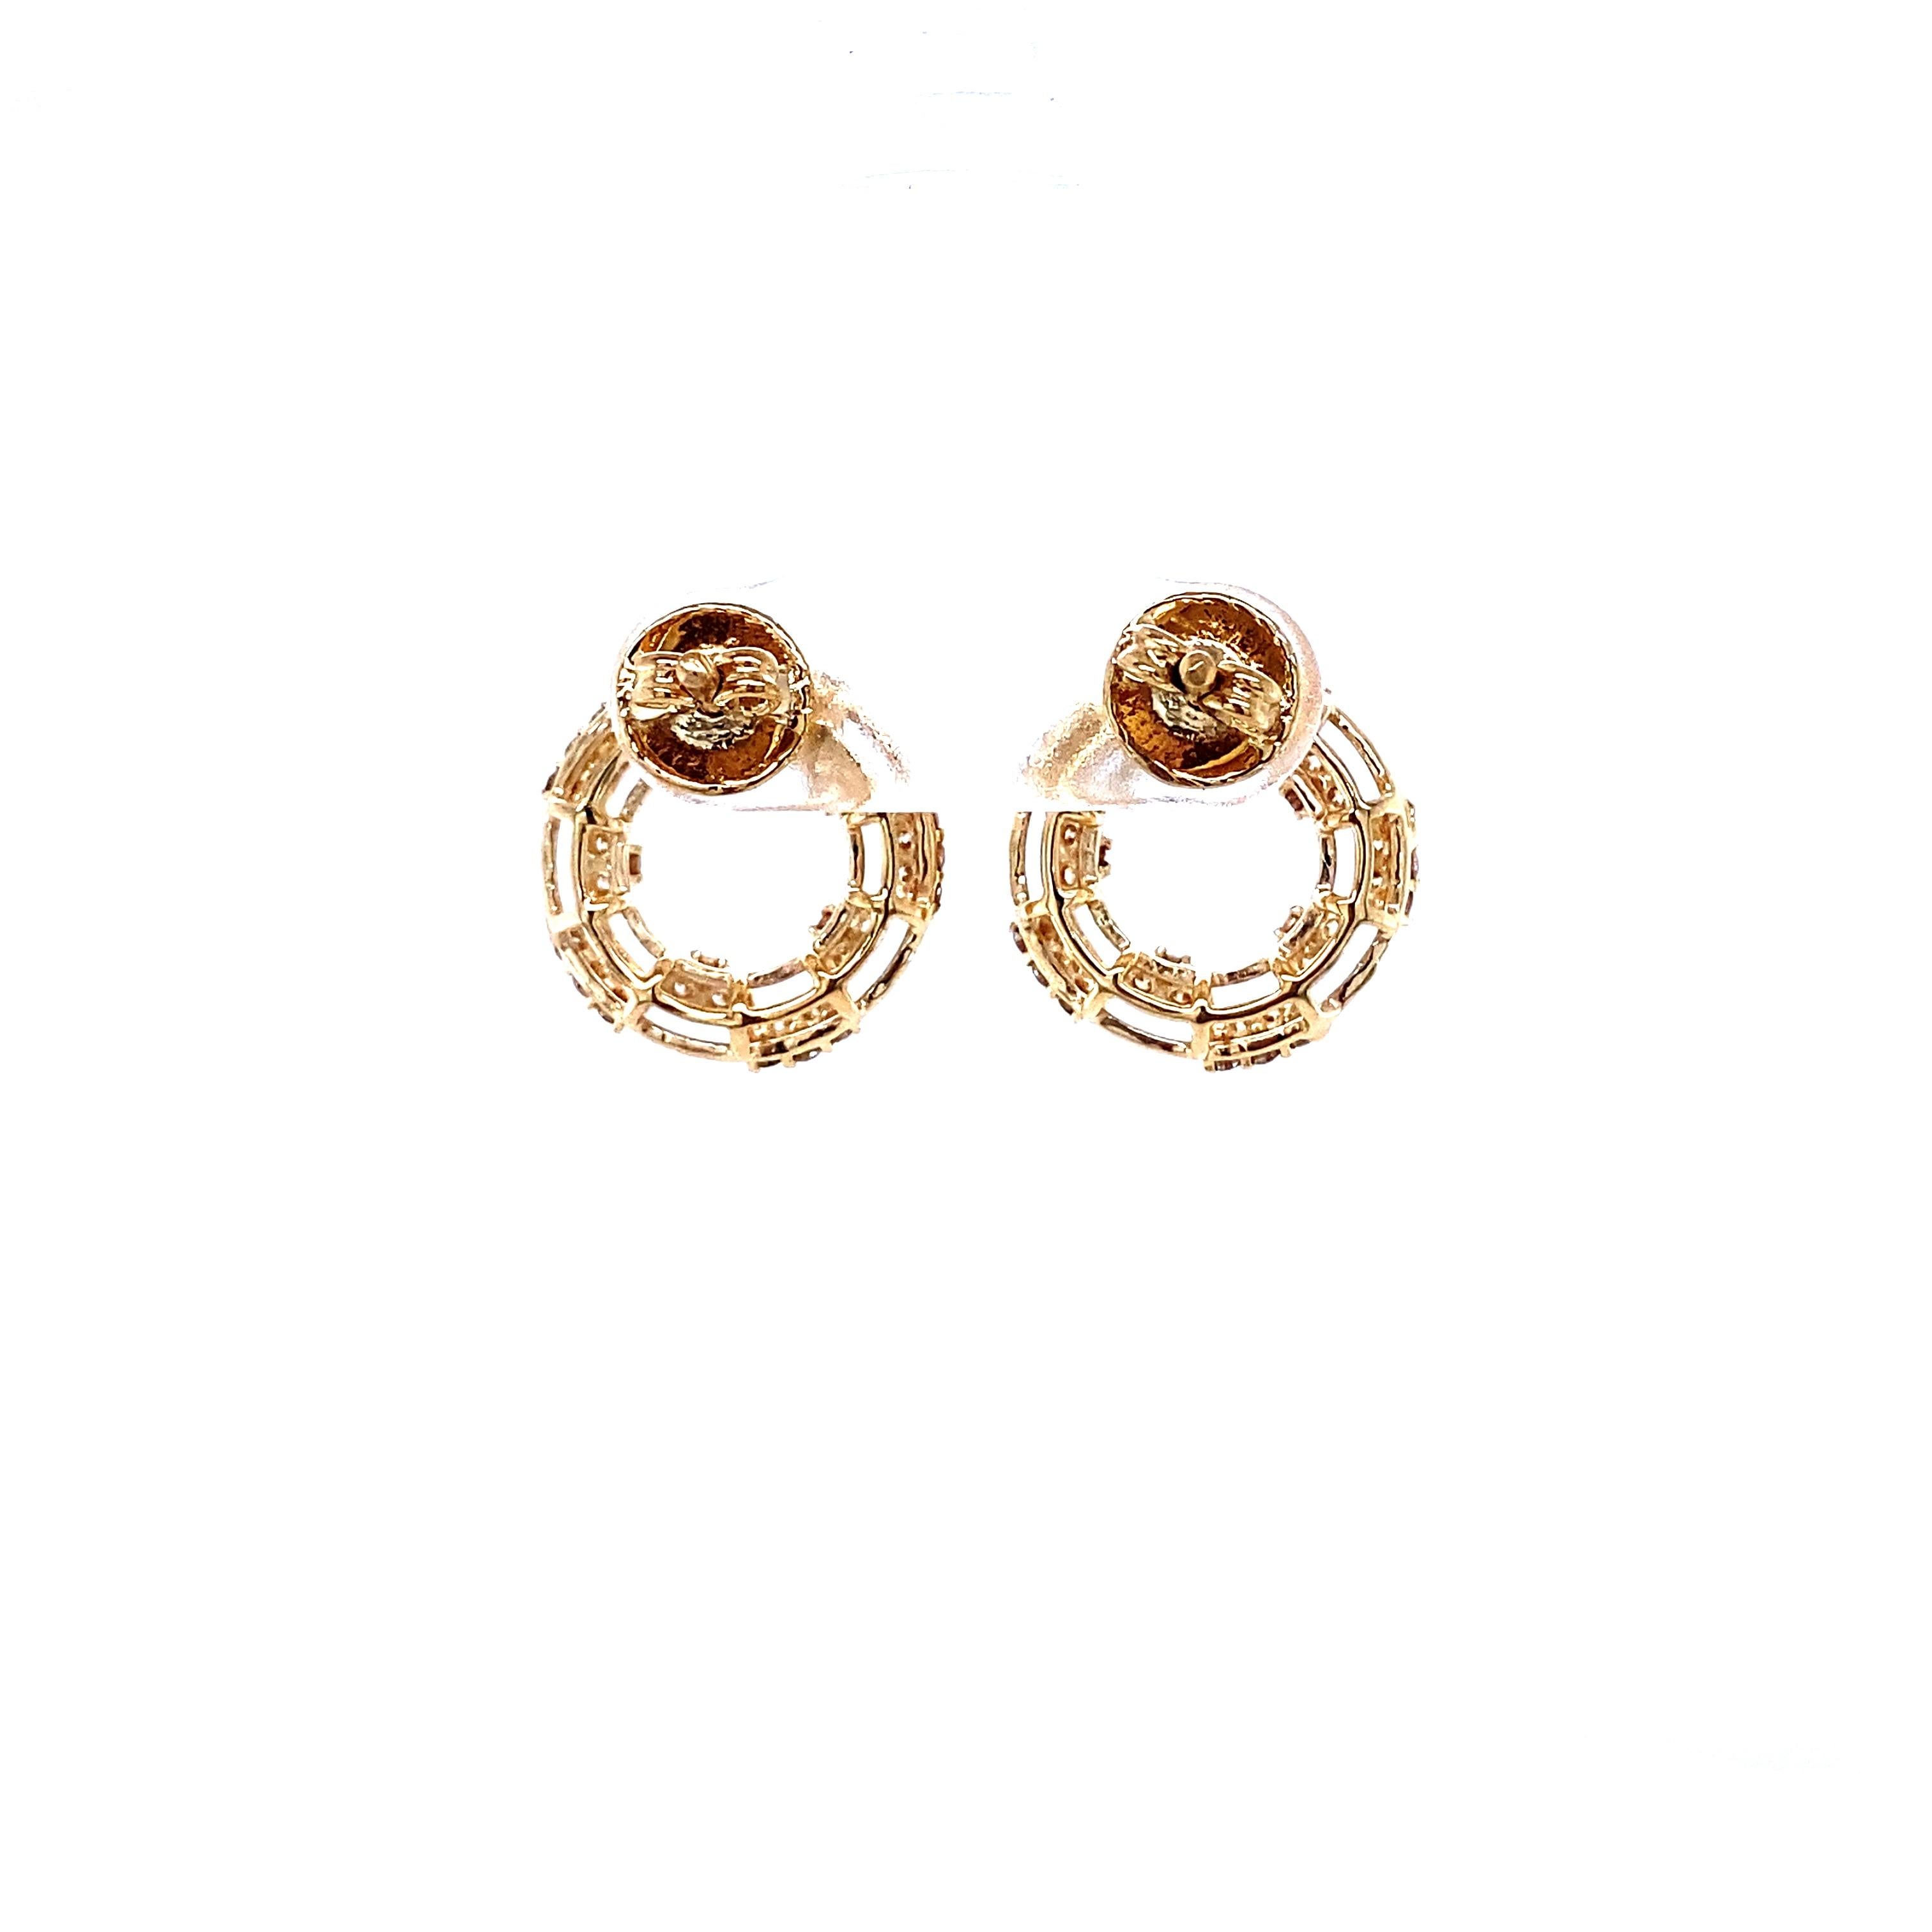 Brilliant Cut Circle Round Diamonds Stud Earrings in 18K Solid Gold For Sale